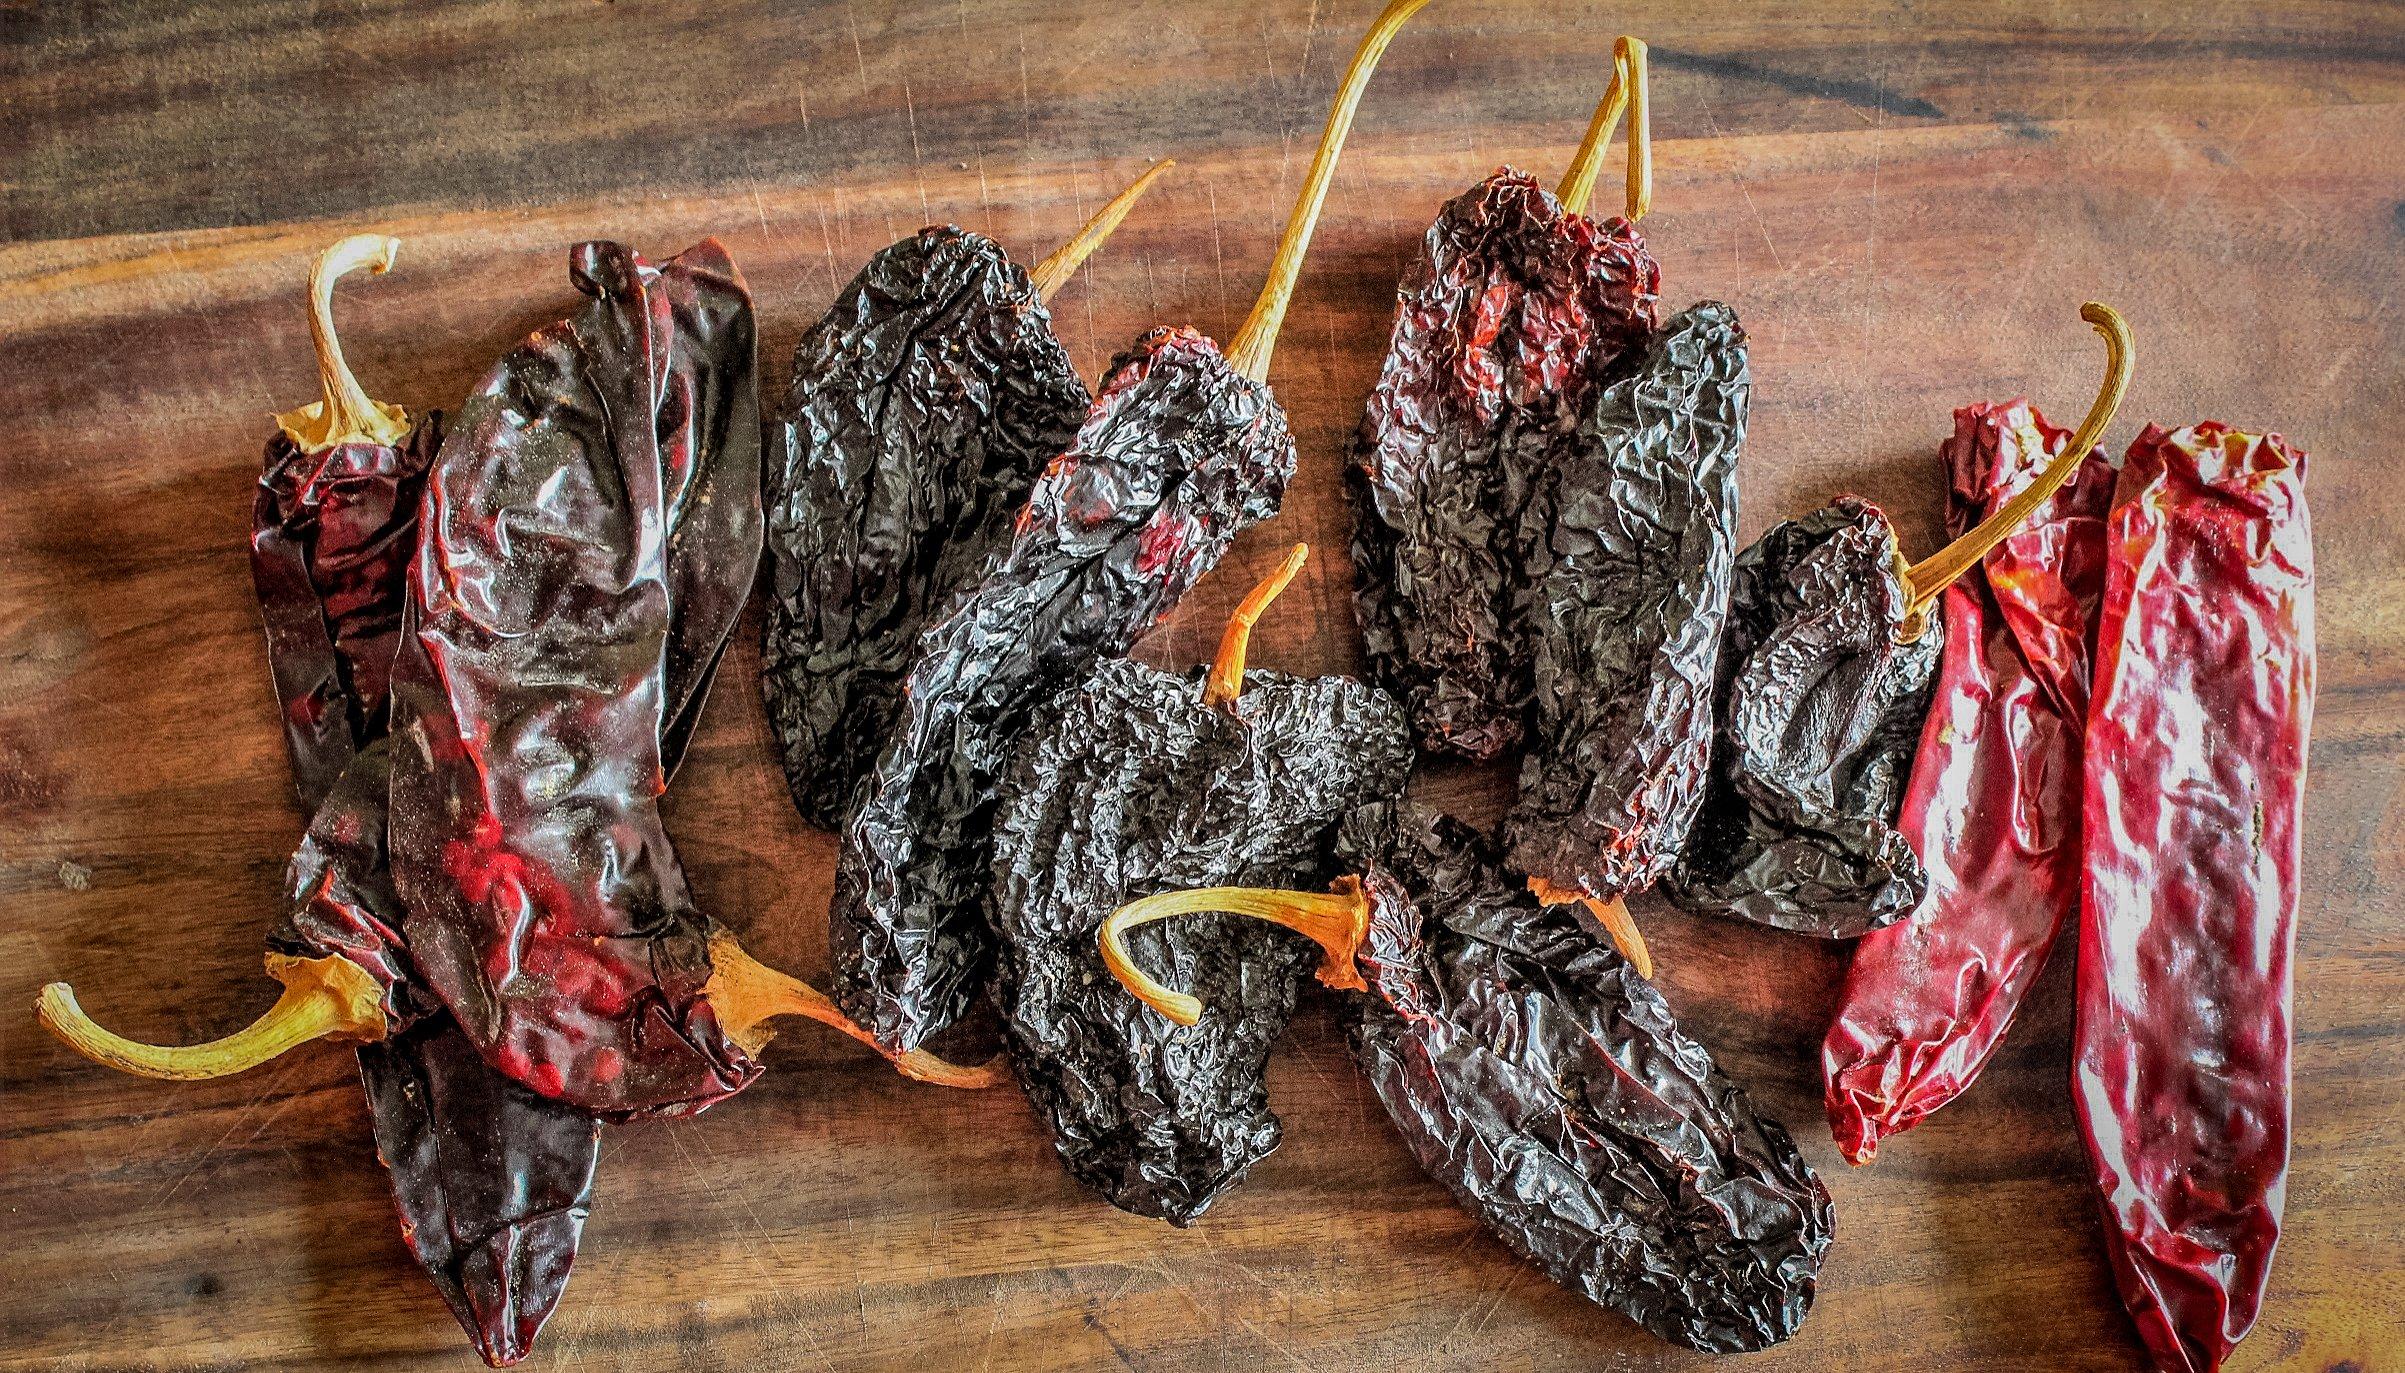 The recipe starts with a blend of dried pepper varieties.